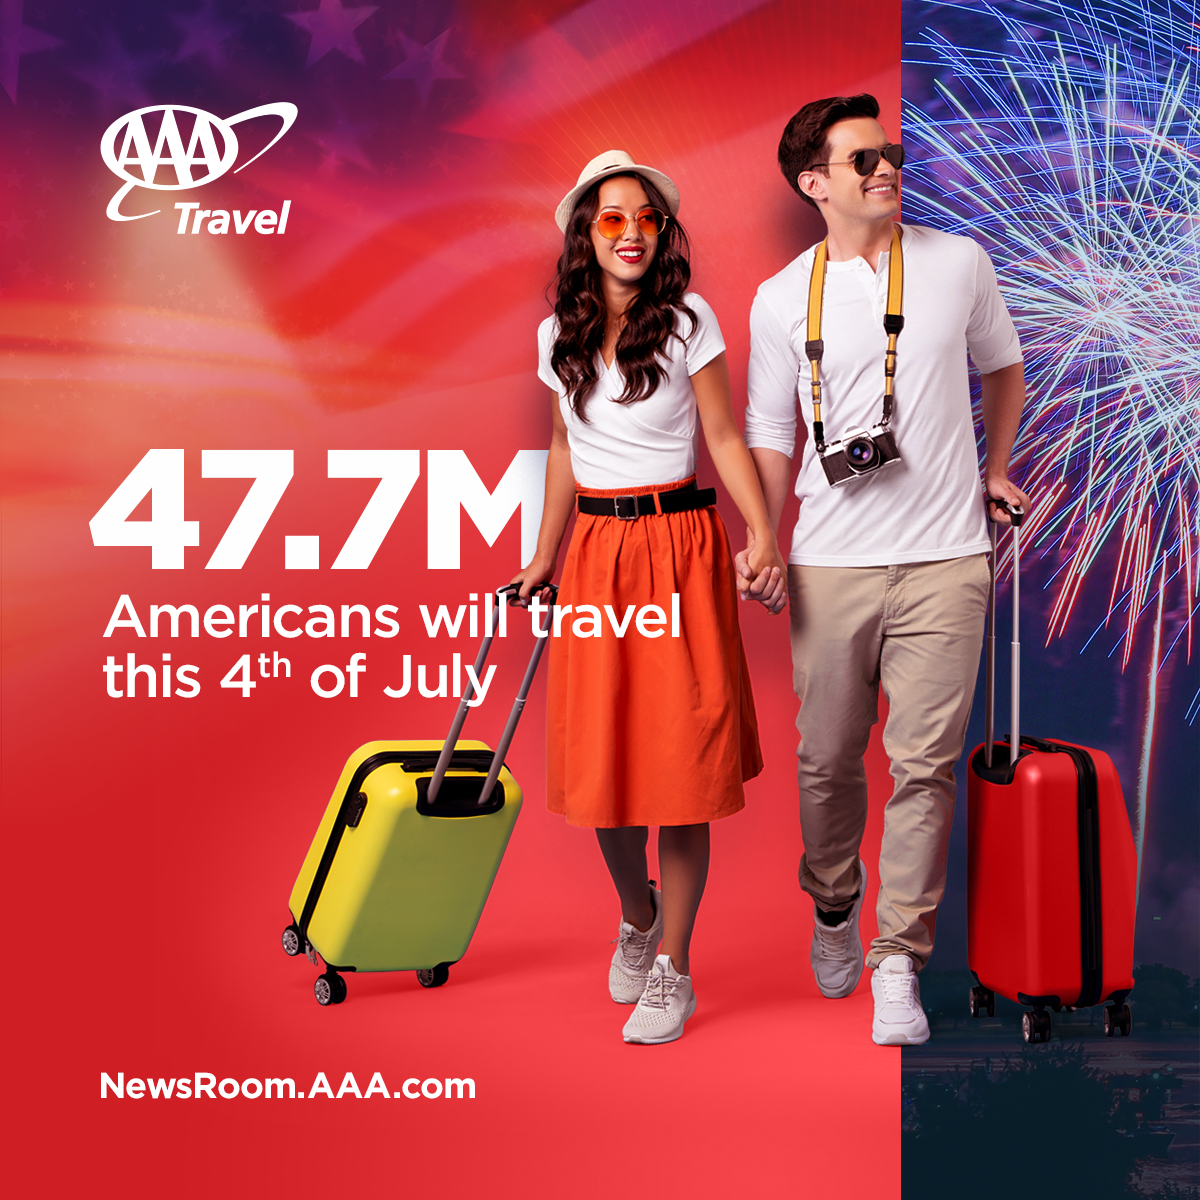 AAA More Than 47M Americans to Celebrate With an Independence Day